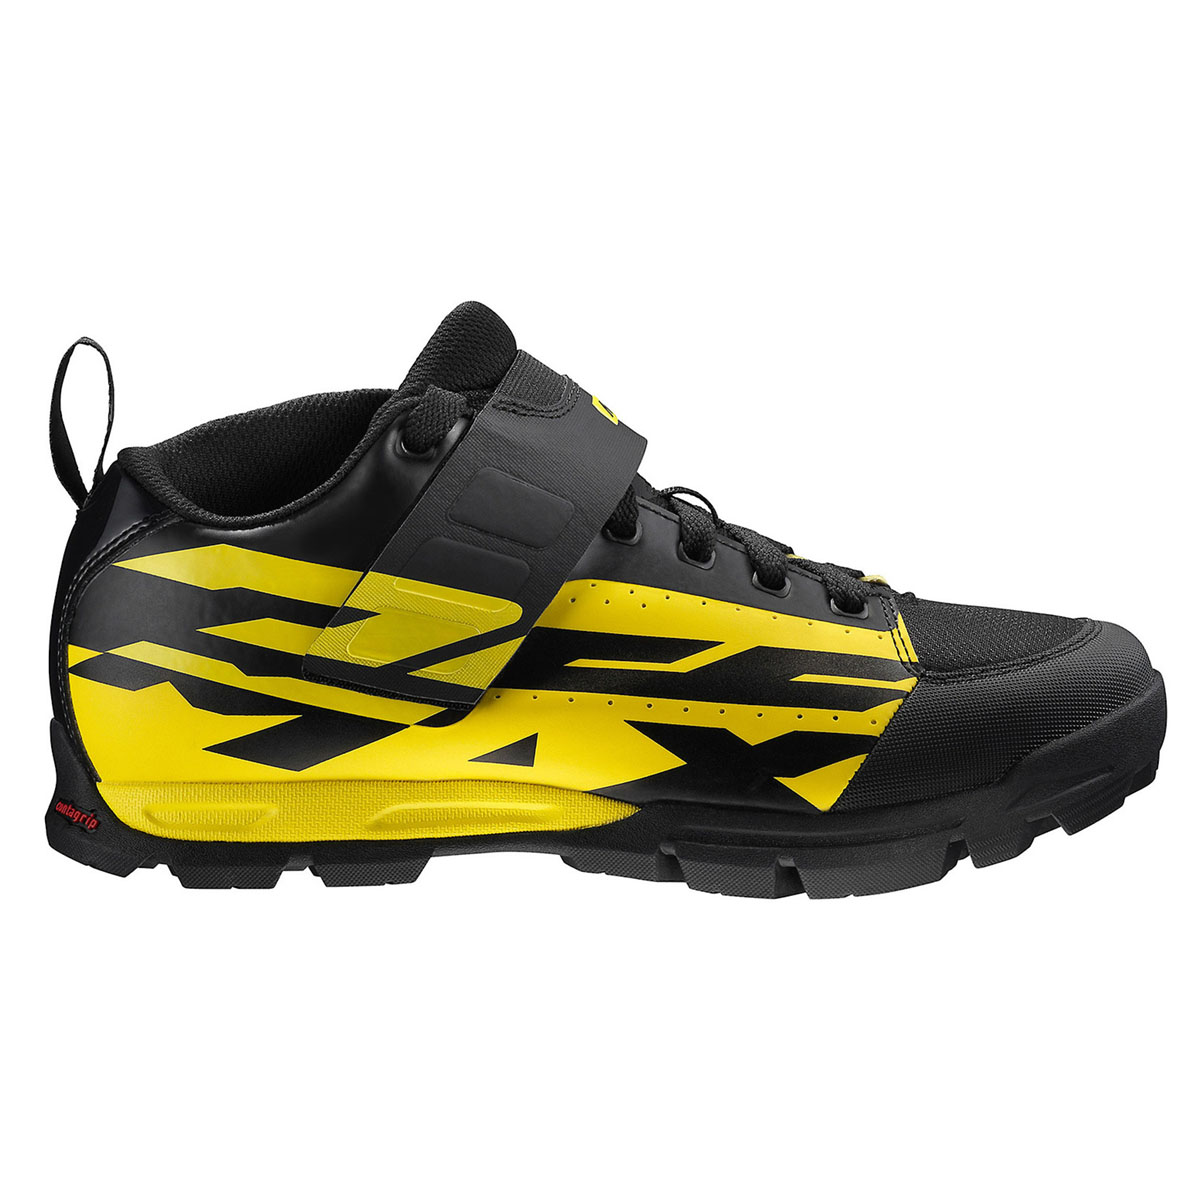  CHAUSSURES MAVIC ROUTE SEQUENCE ELITE FEMME